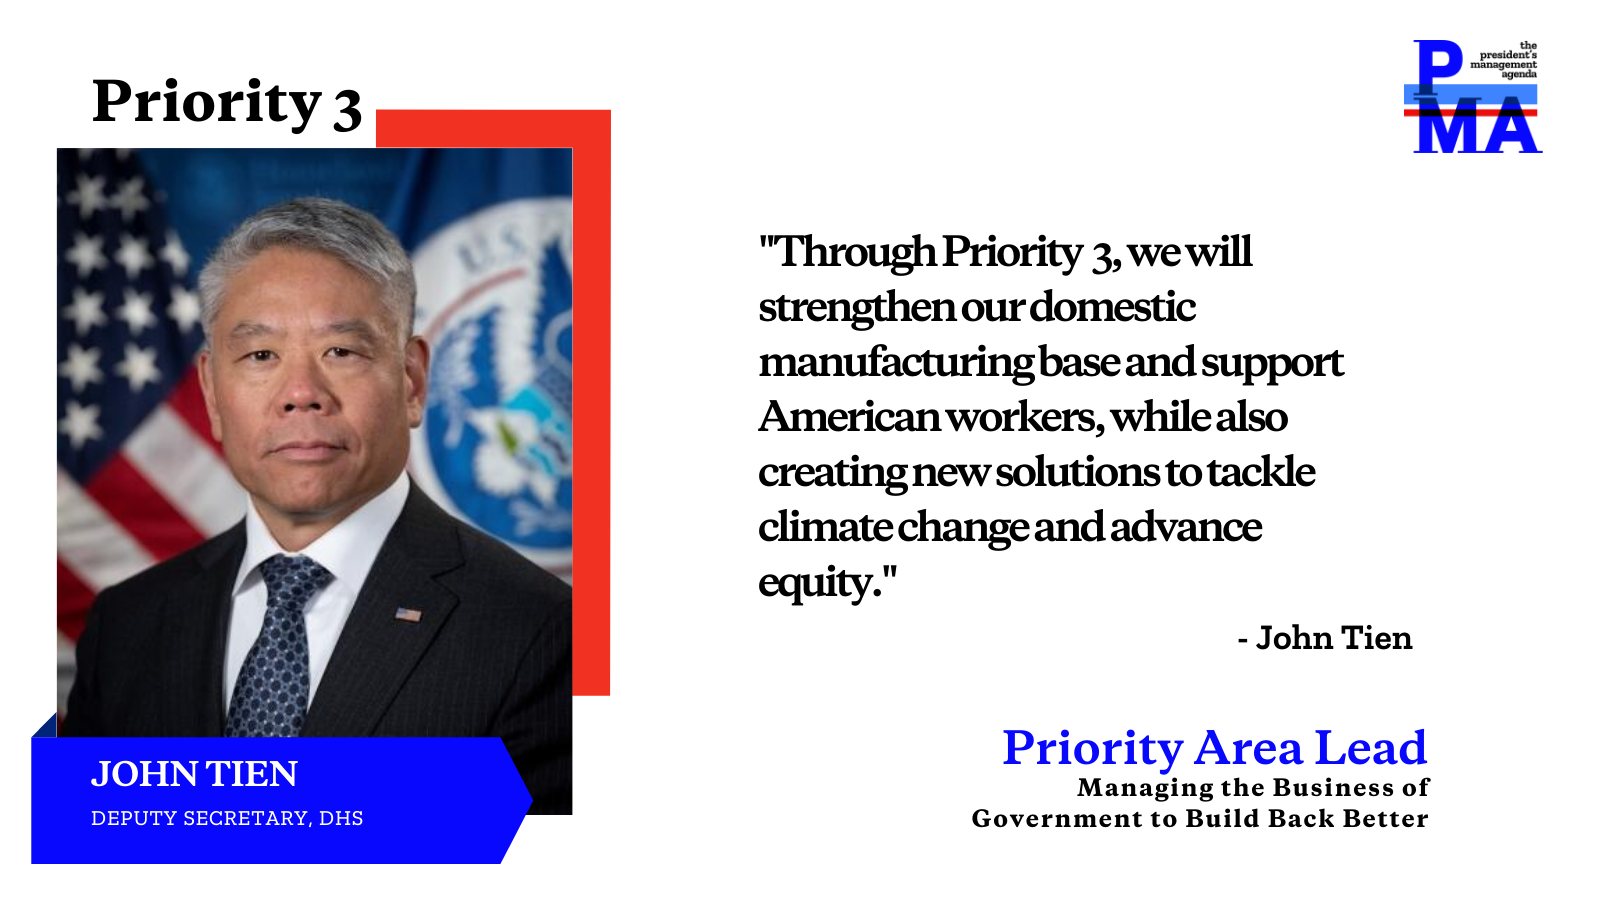 Social card of John Tien with text: Through Priority 3, we will strengthen our domestic manufacturing base and support American workers, while also creating new solutions to tackle climate change and advance equity.